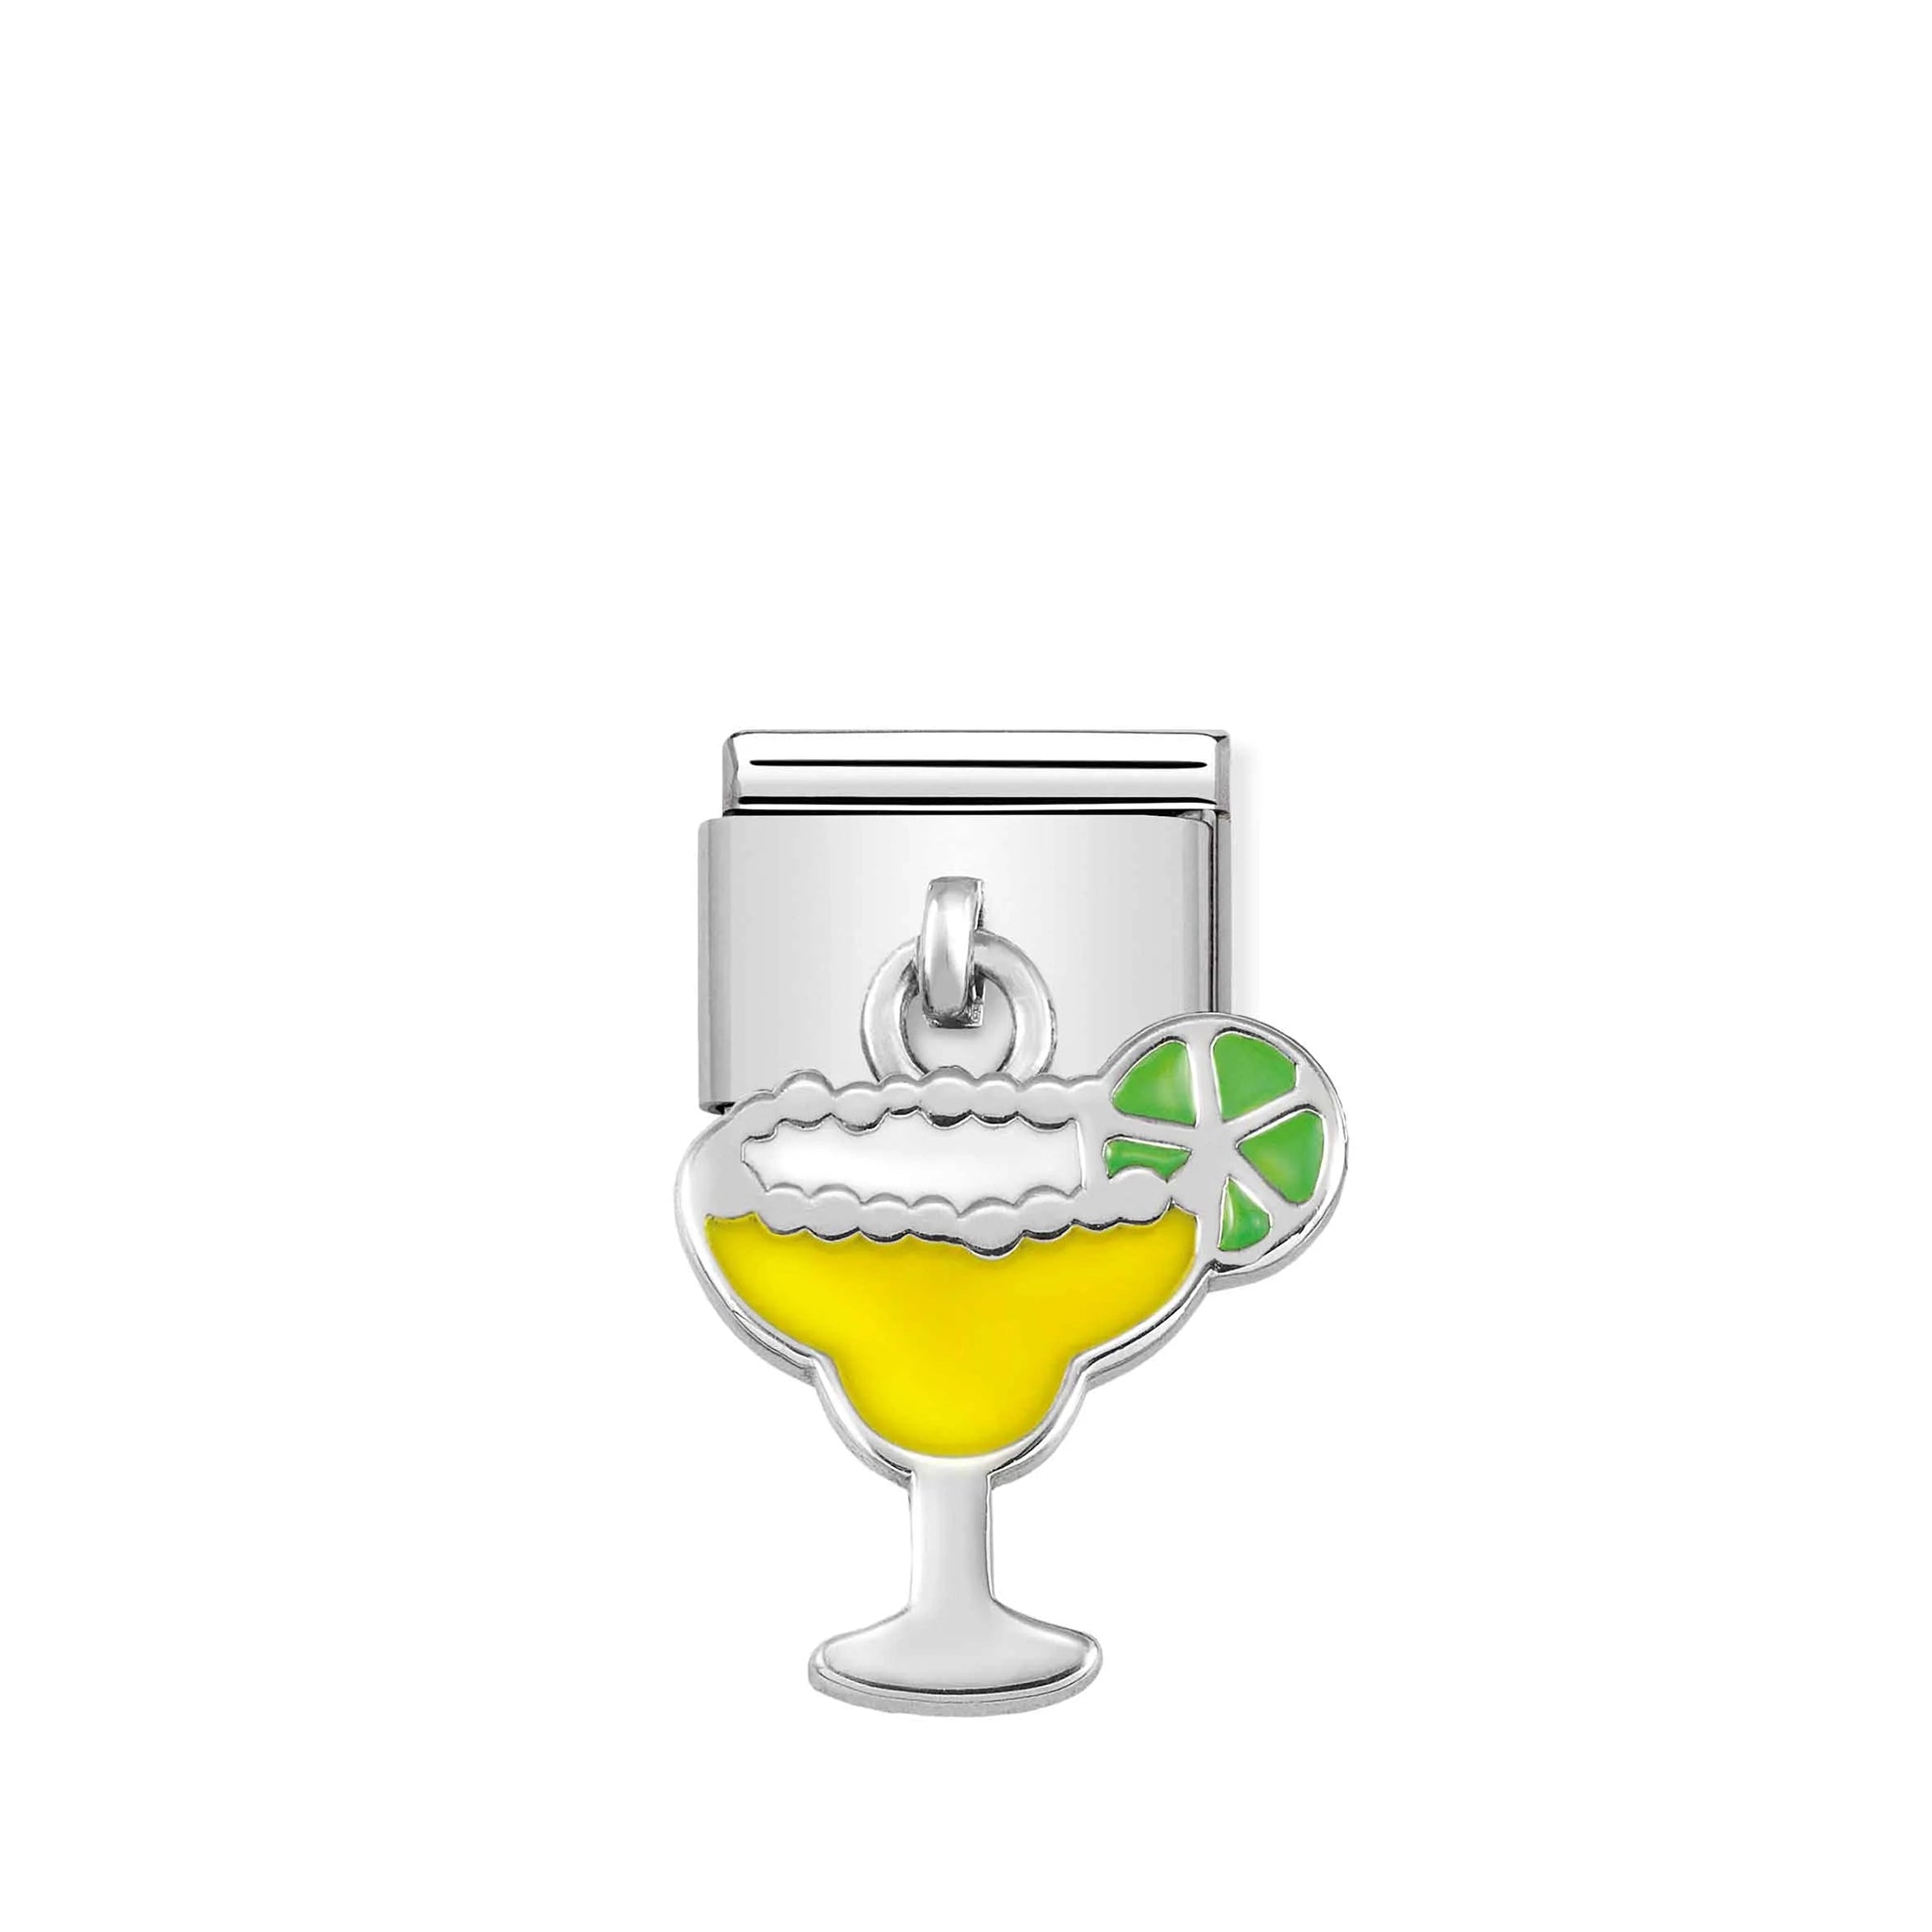 Nomination charm link featuring a silver drop of a cocktail glass with lime in yellow and green enamel